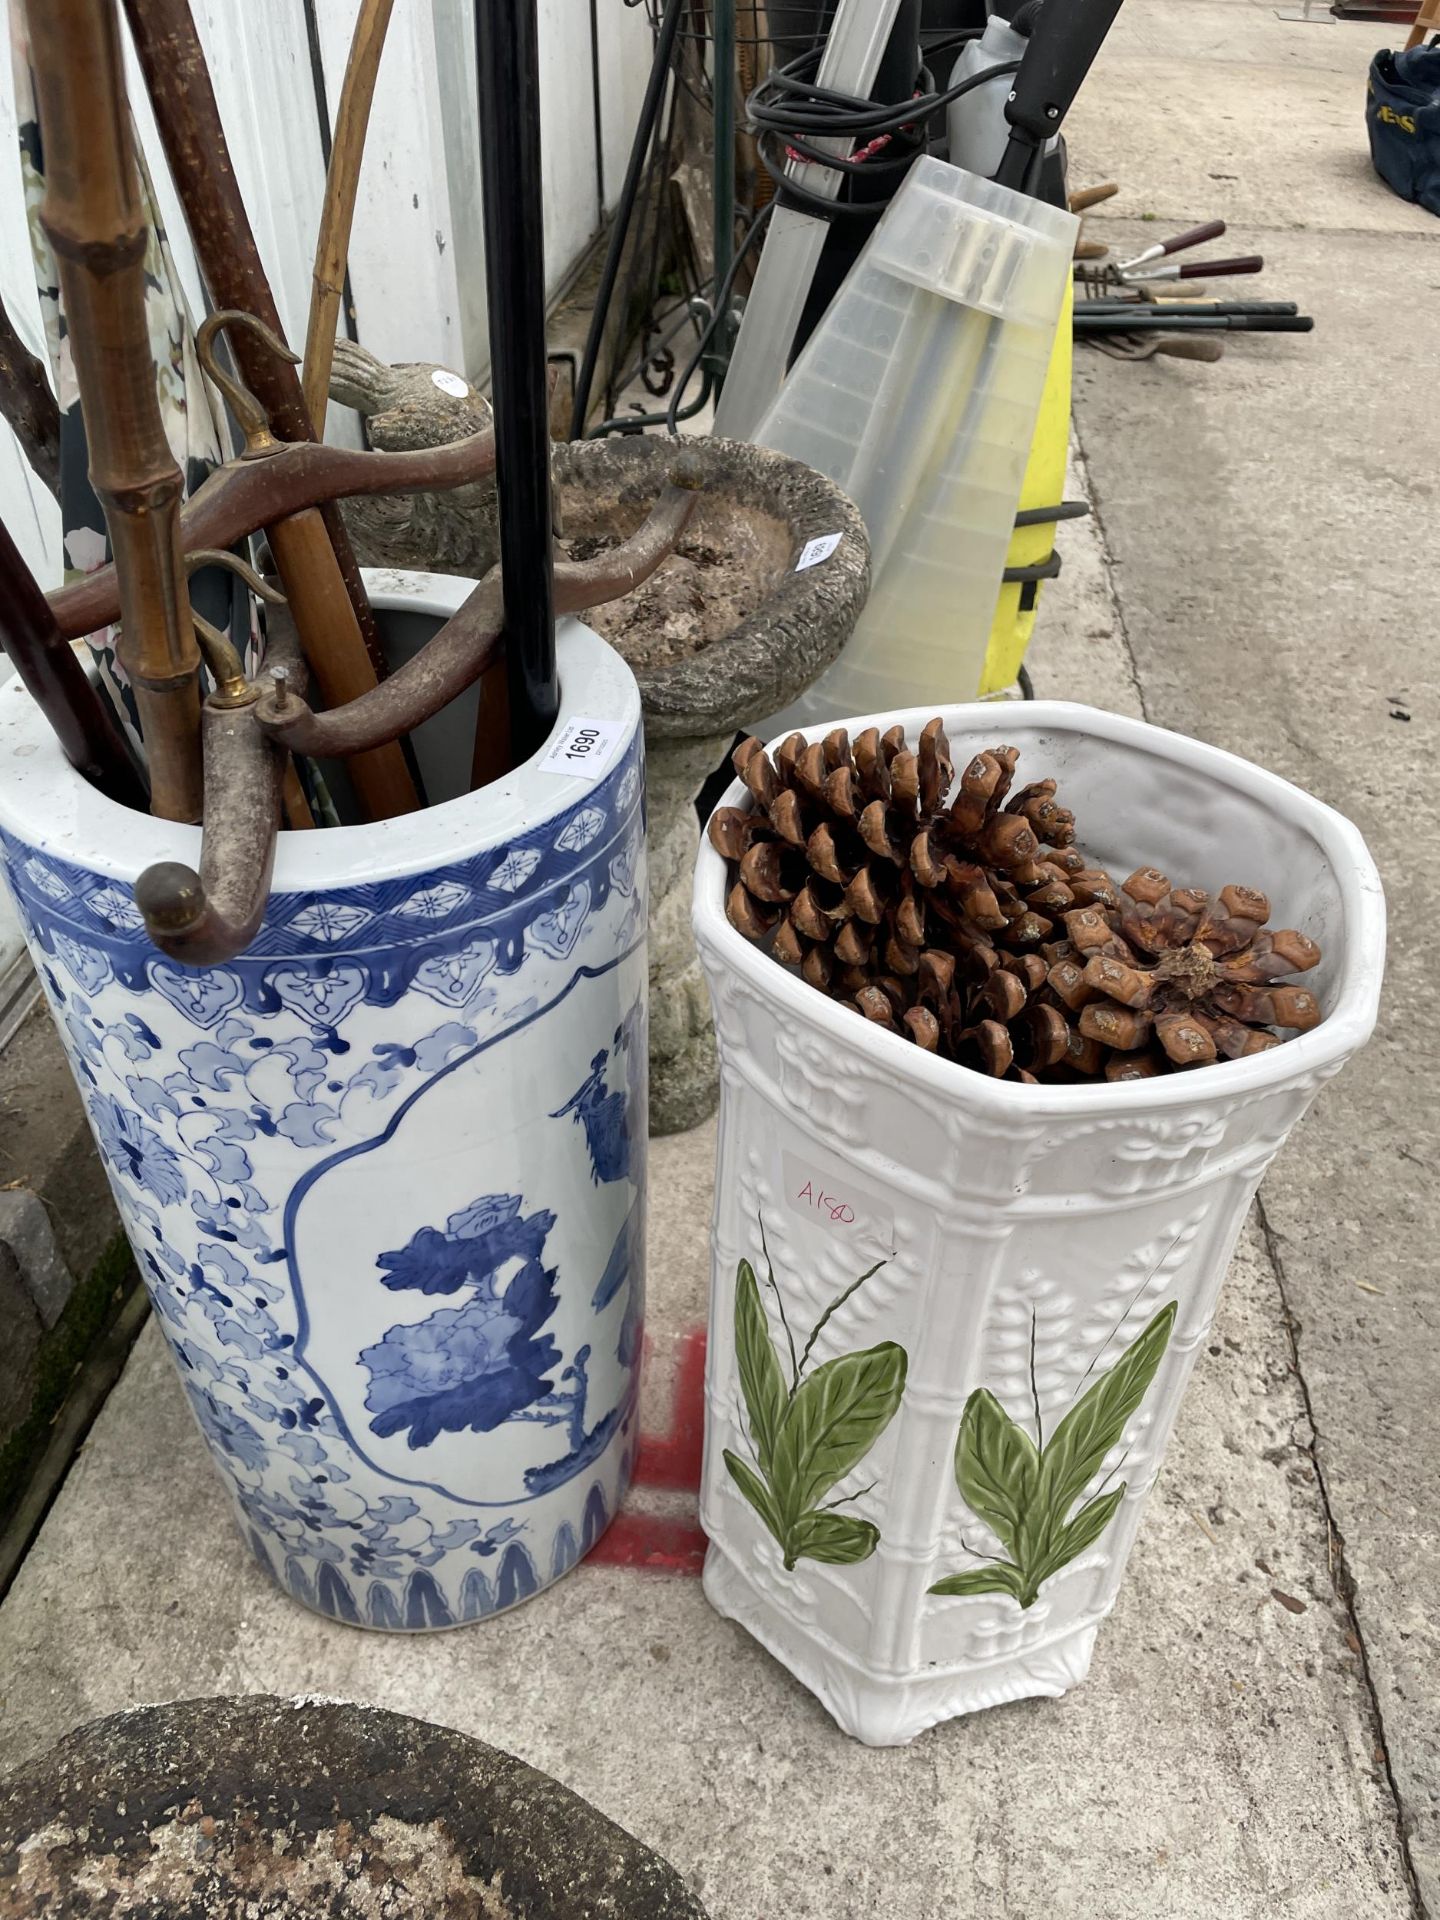 TWO CERAMIC STICK STANDS AND AN ASSORTMENT OF WALKING STICKS - Image 2 of 2